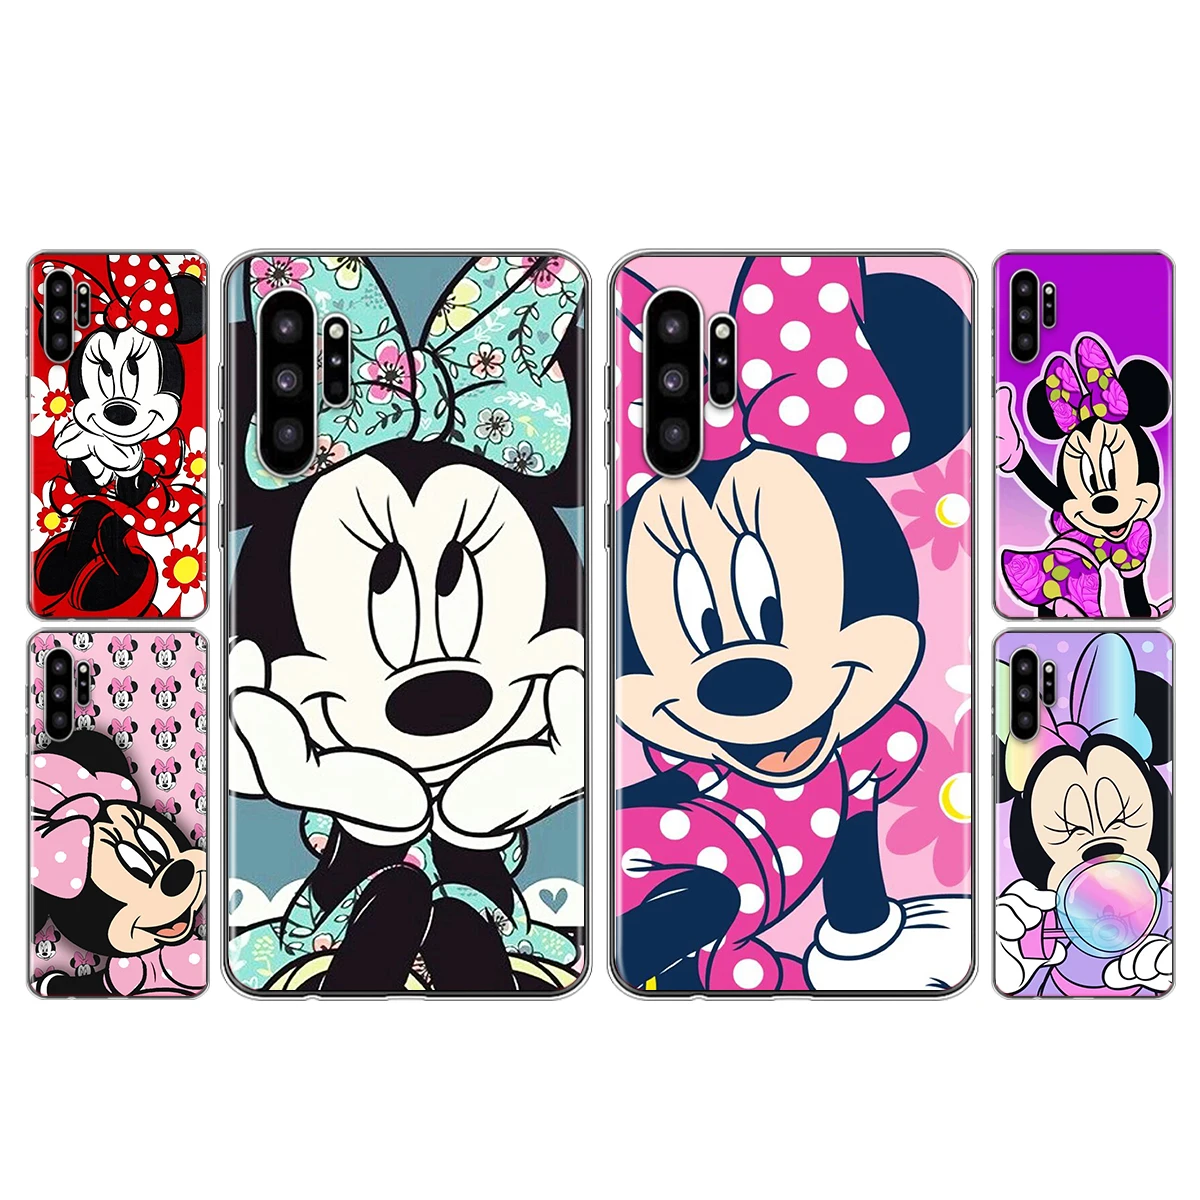 

Disney Minnie Mouse Cute For Samsung Note 20 Ultra 10 Pro Plus 8 9 M02 M31 S M60S M40 M30 M21 M20 M10 S M62 M12 F52 Phone Case